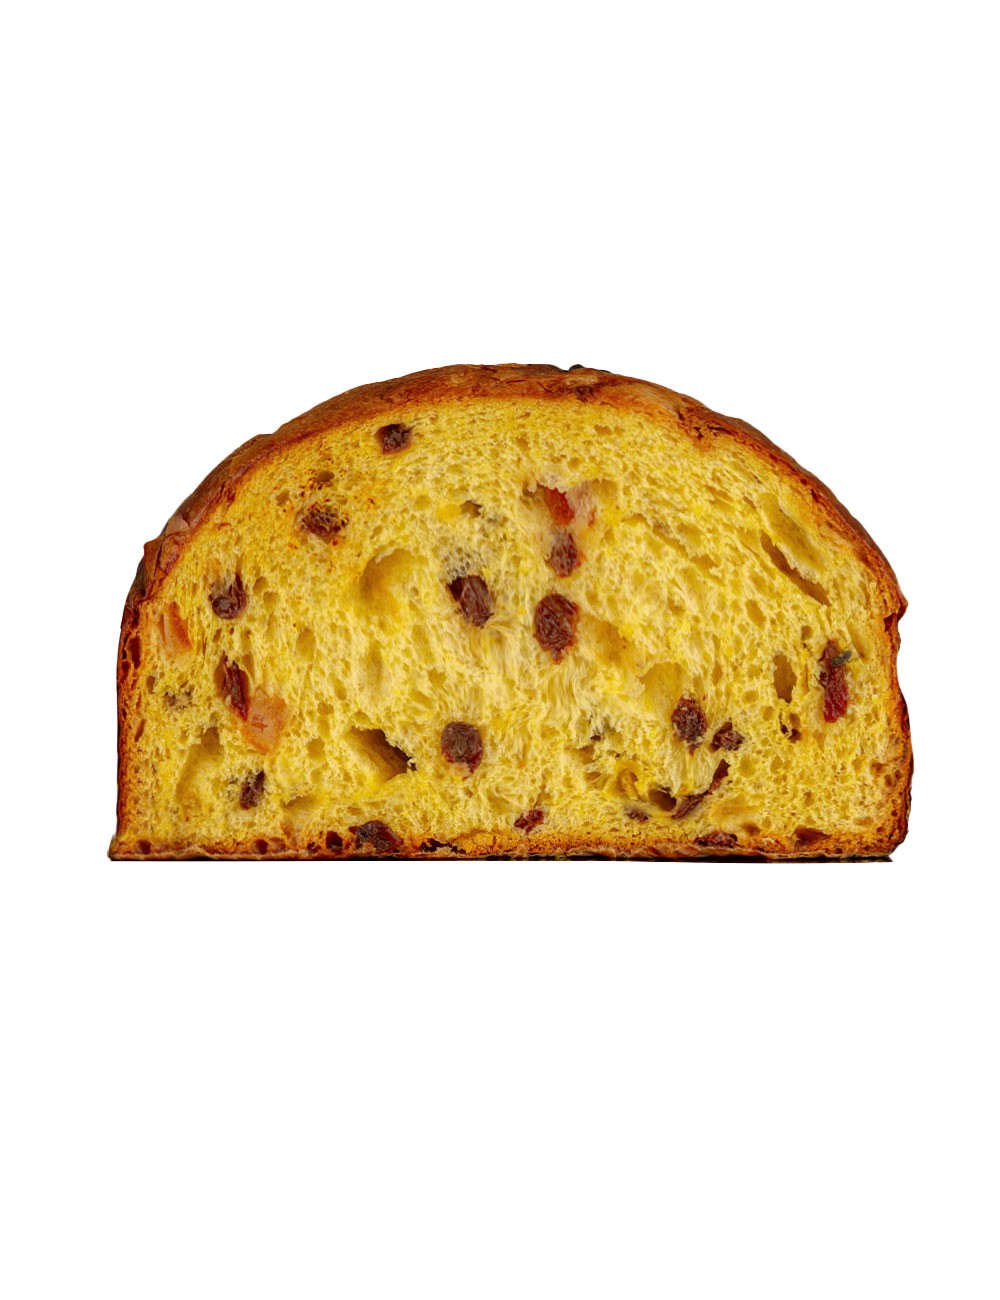 Classic Panettone with candied fruit from Pasticceria Natili 1 kg